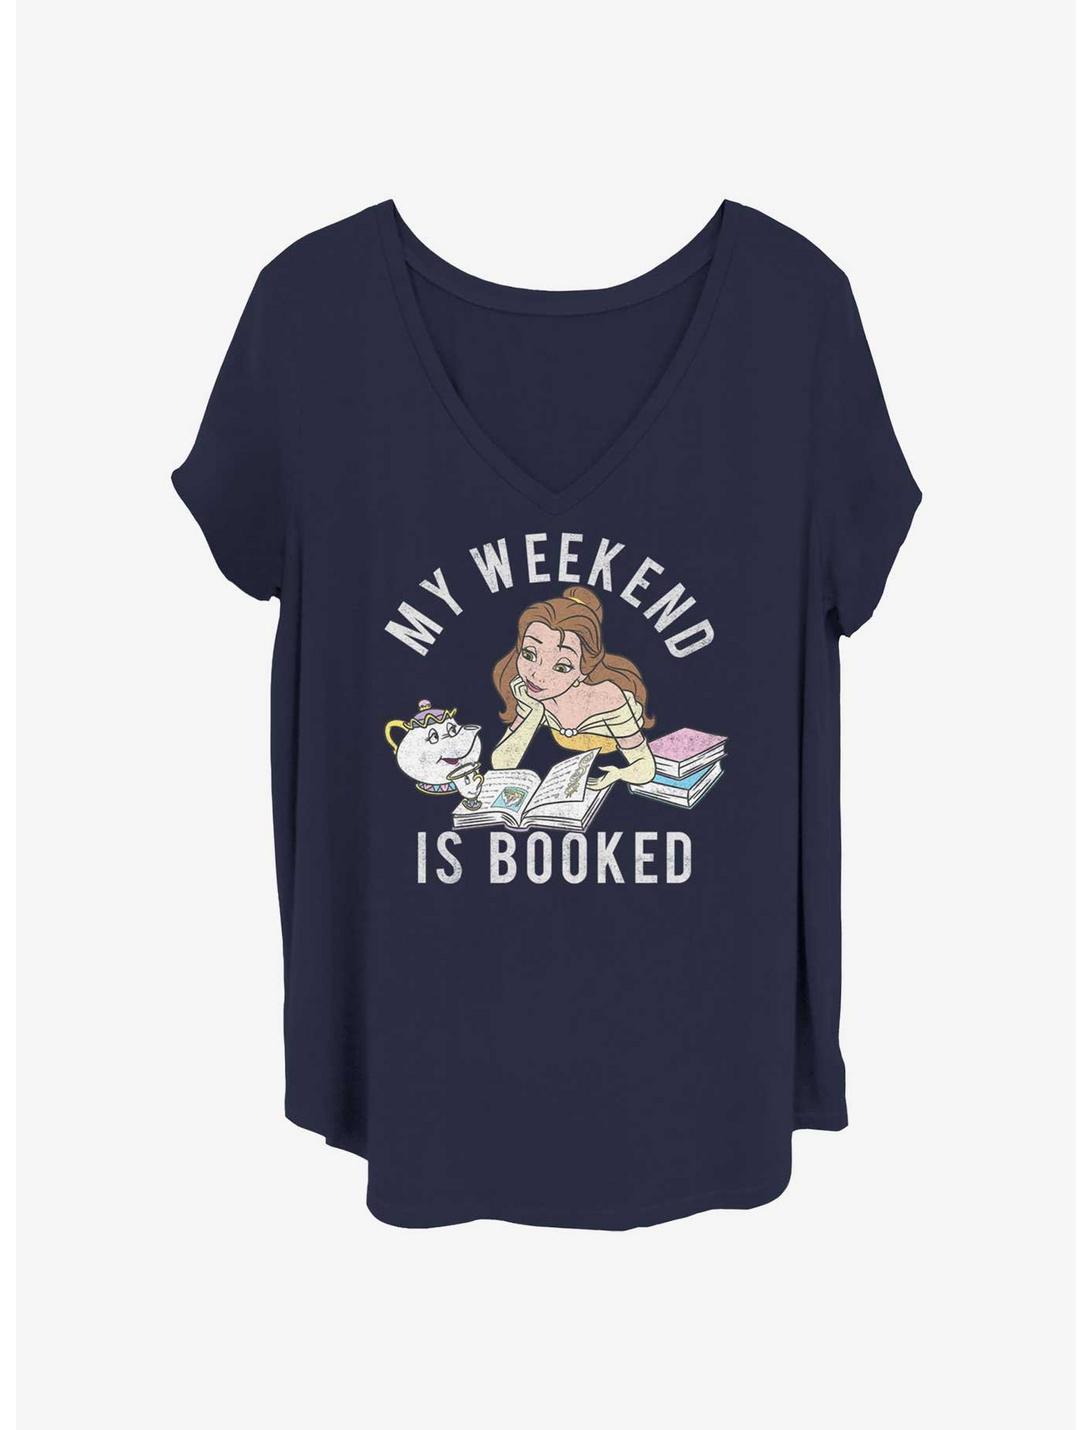 Disney Beauty and the Beast Weekend Booked Womens T-Shirt Plus Size, NAVY, hi-res